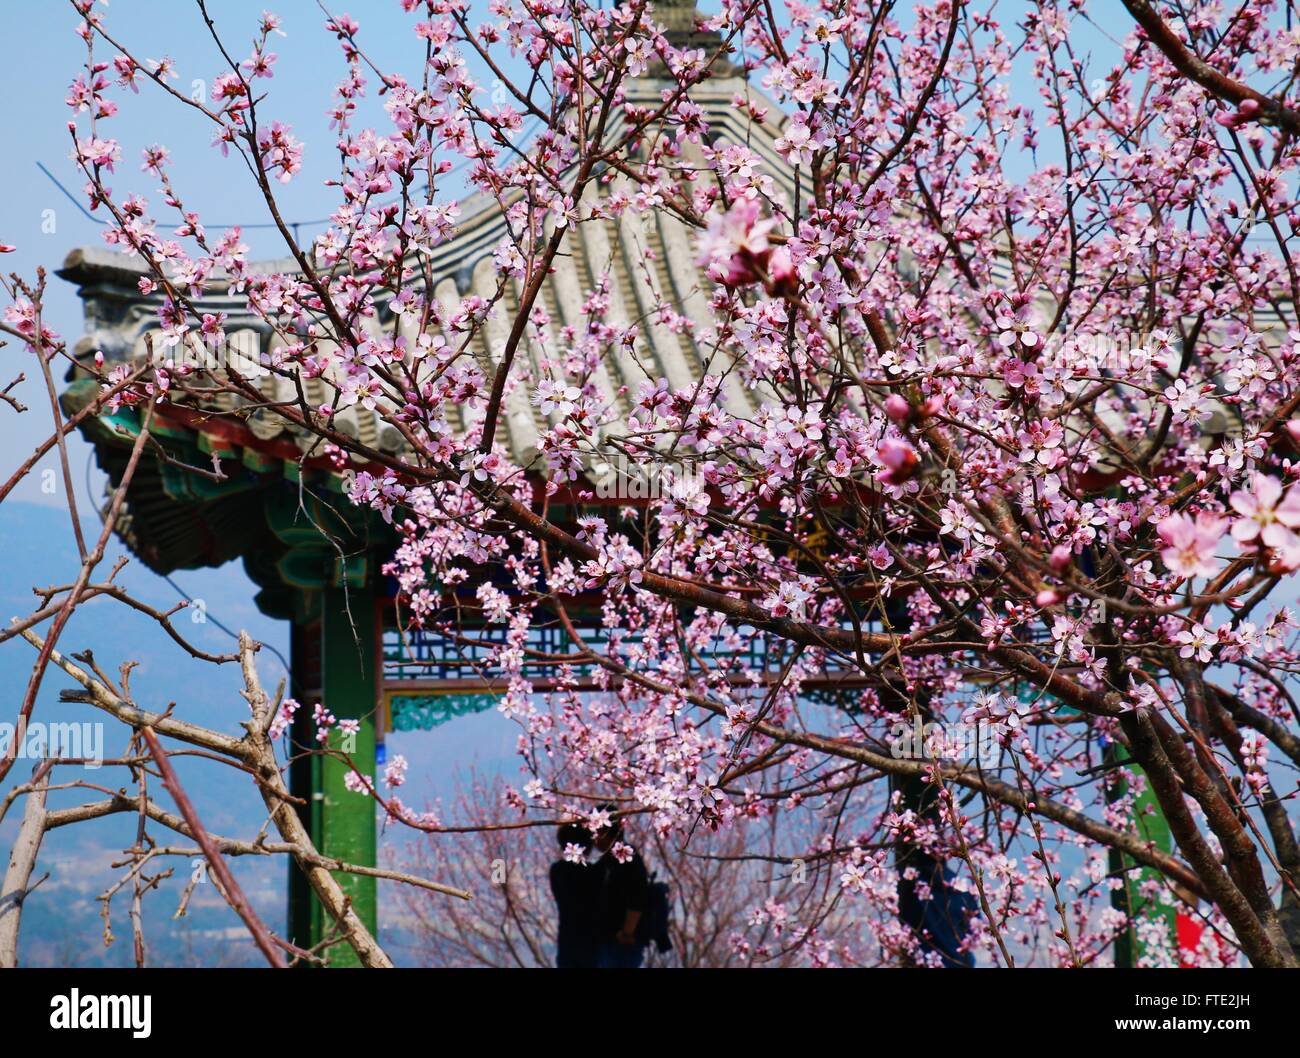 Couple in a pagoda and cherry blossom flowers in the background Stock Photo